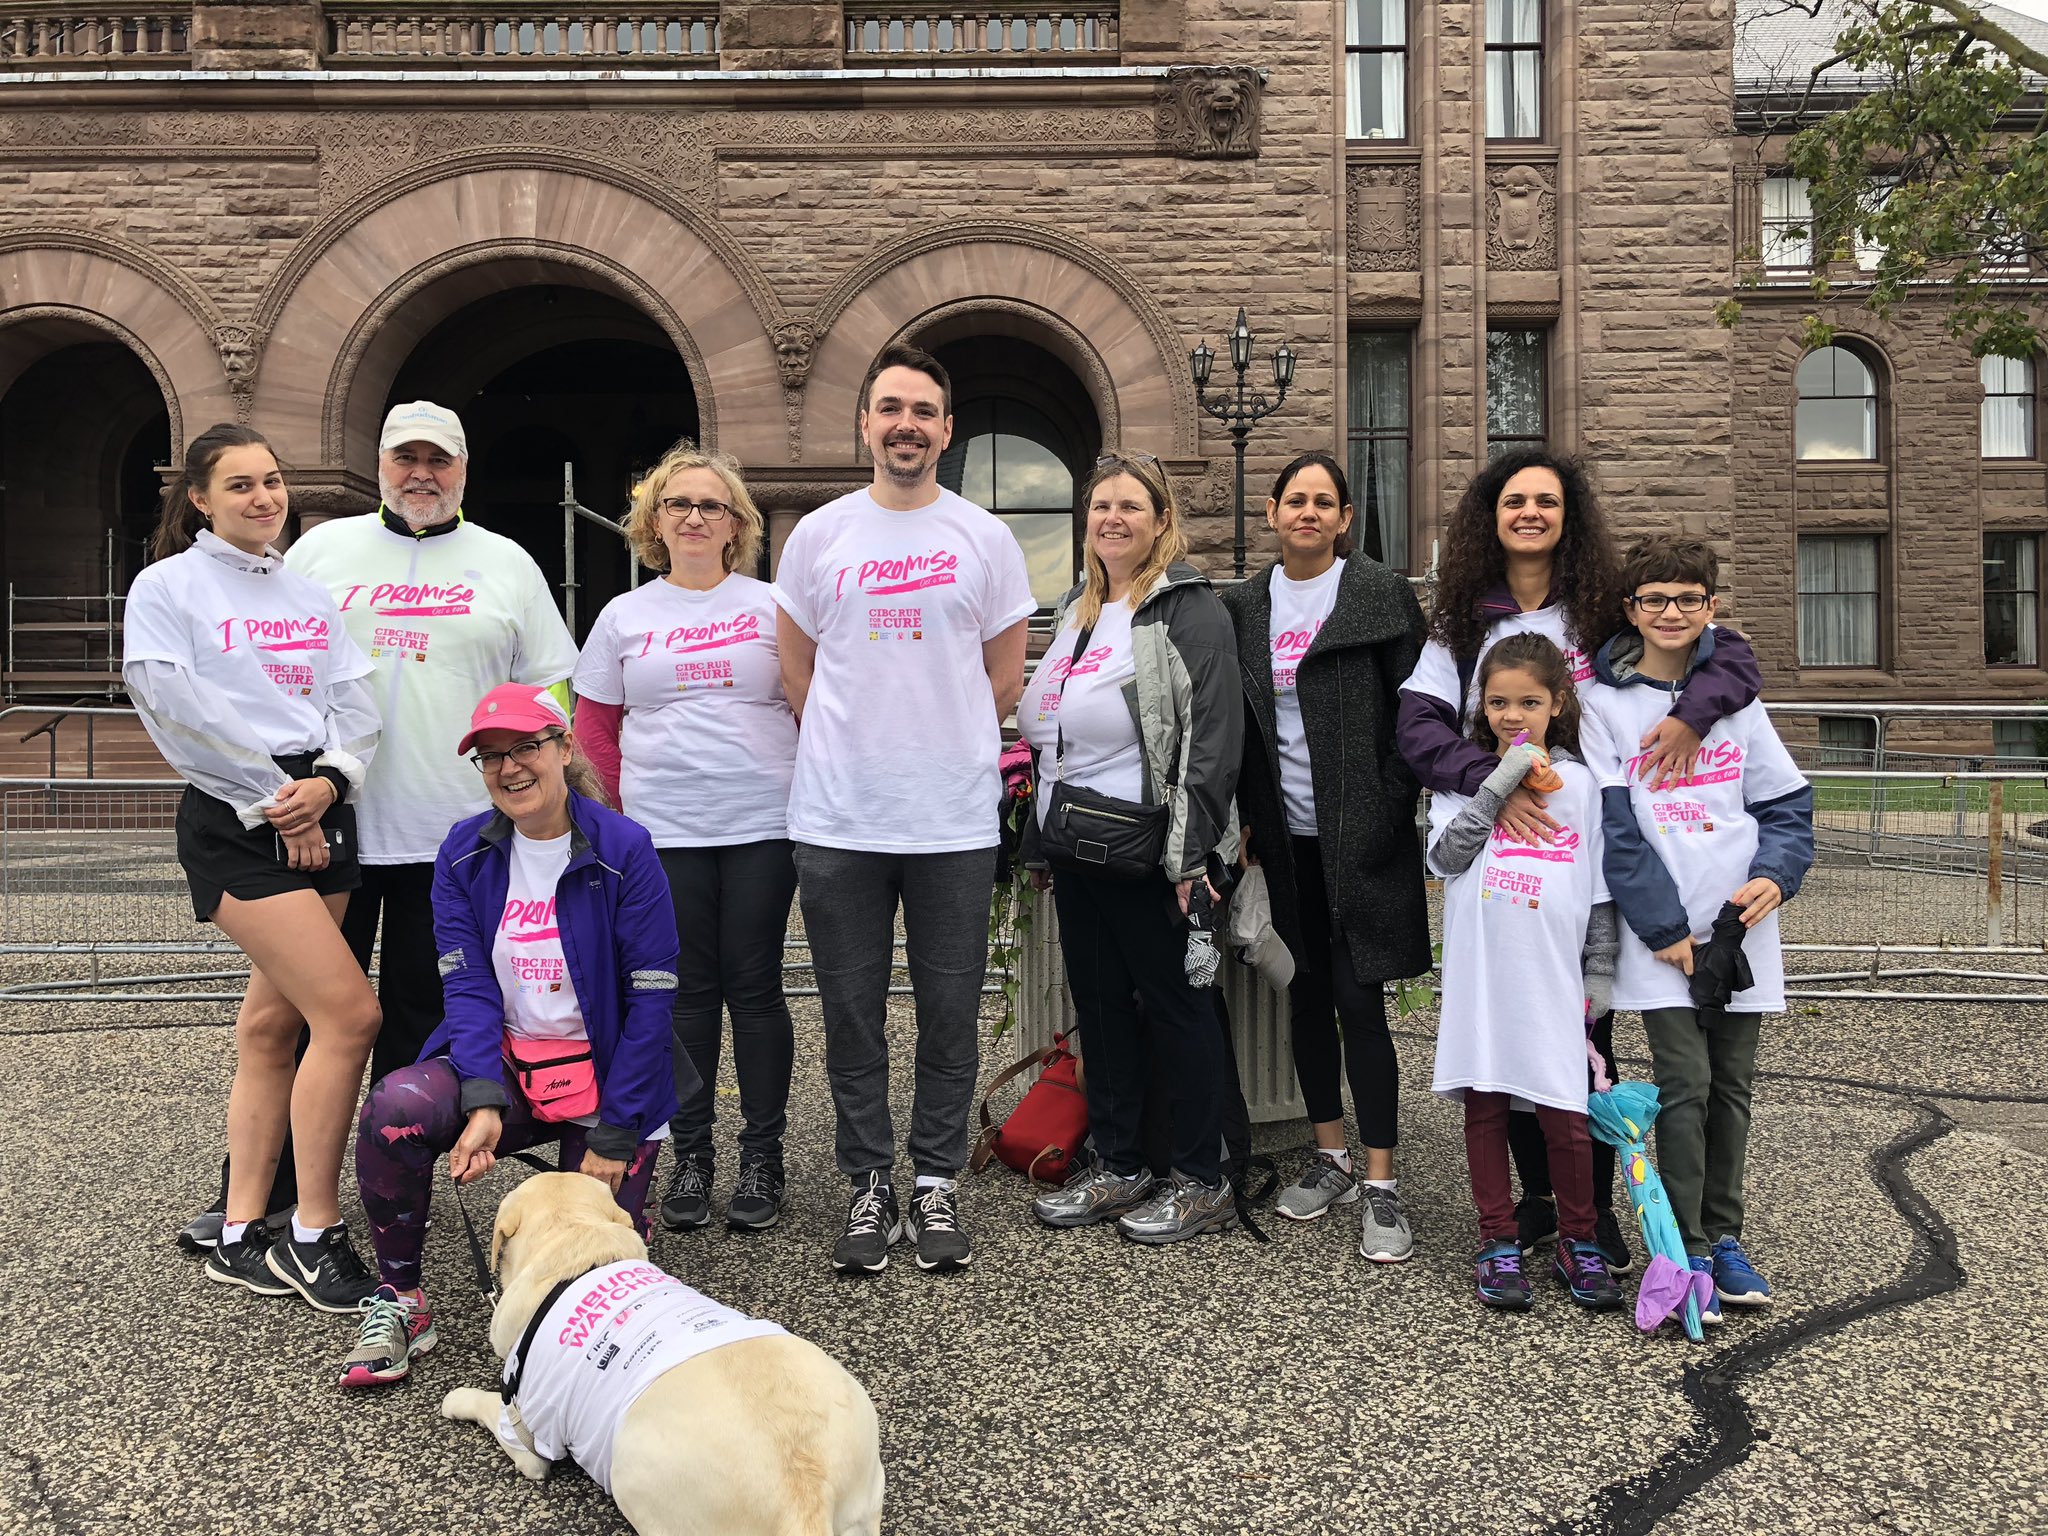 Our staff Run for the Cure Team, dubbed the Ombudsman Watchdogs, participated in the charity event for breast cancer research for the 12th straight year, at Queen’s Park.